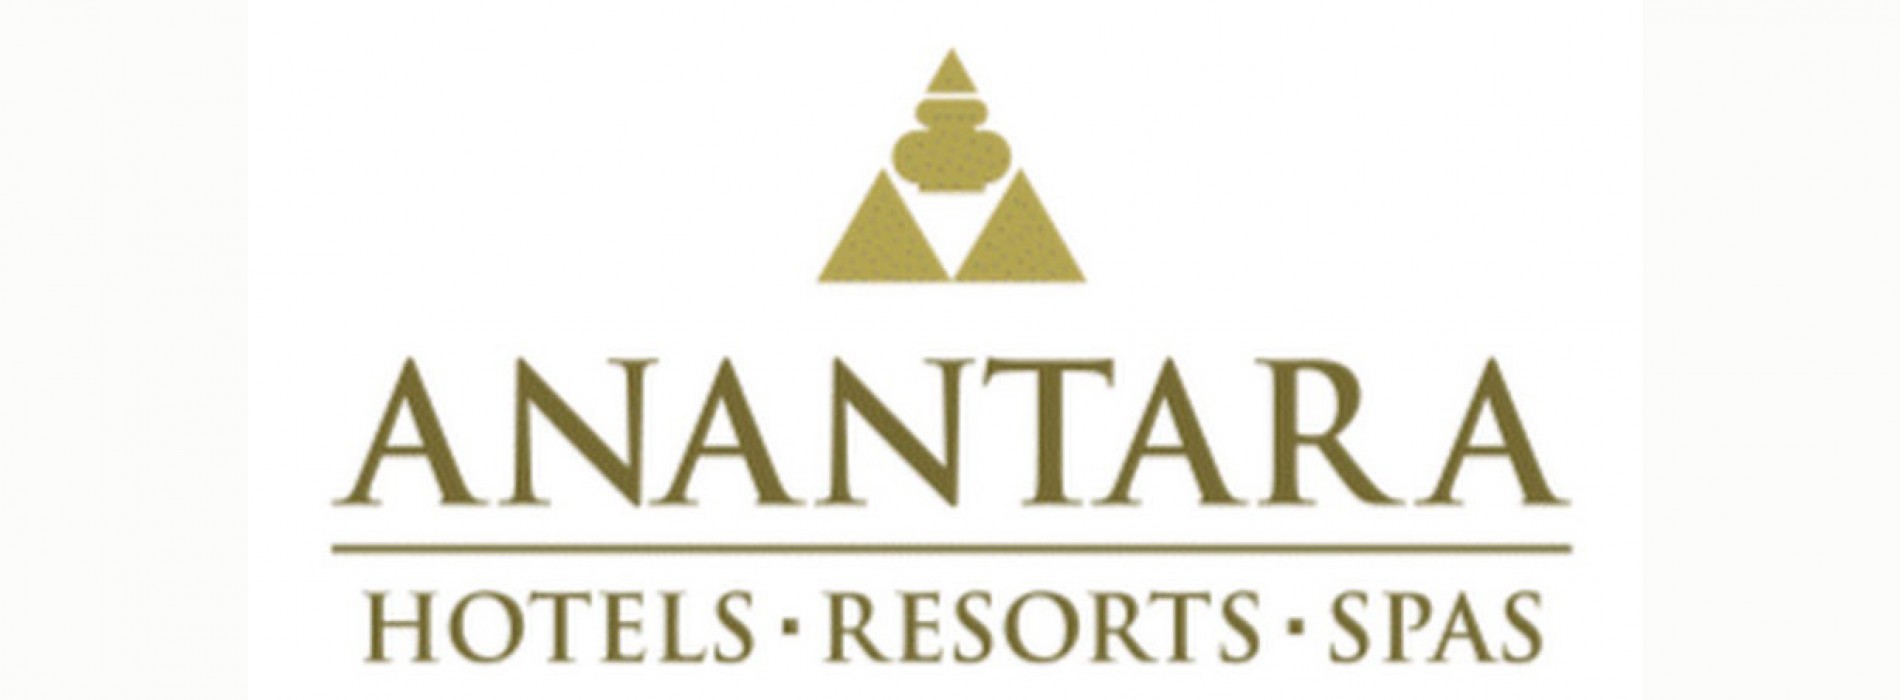 Anantara Hotels and Resorts to launch first luxury global hotel brand in Qingyang